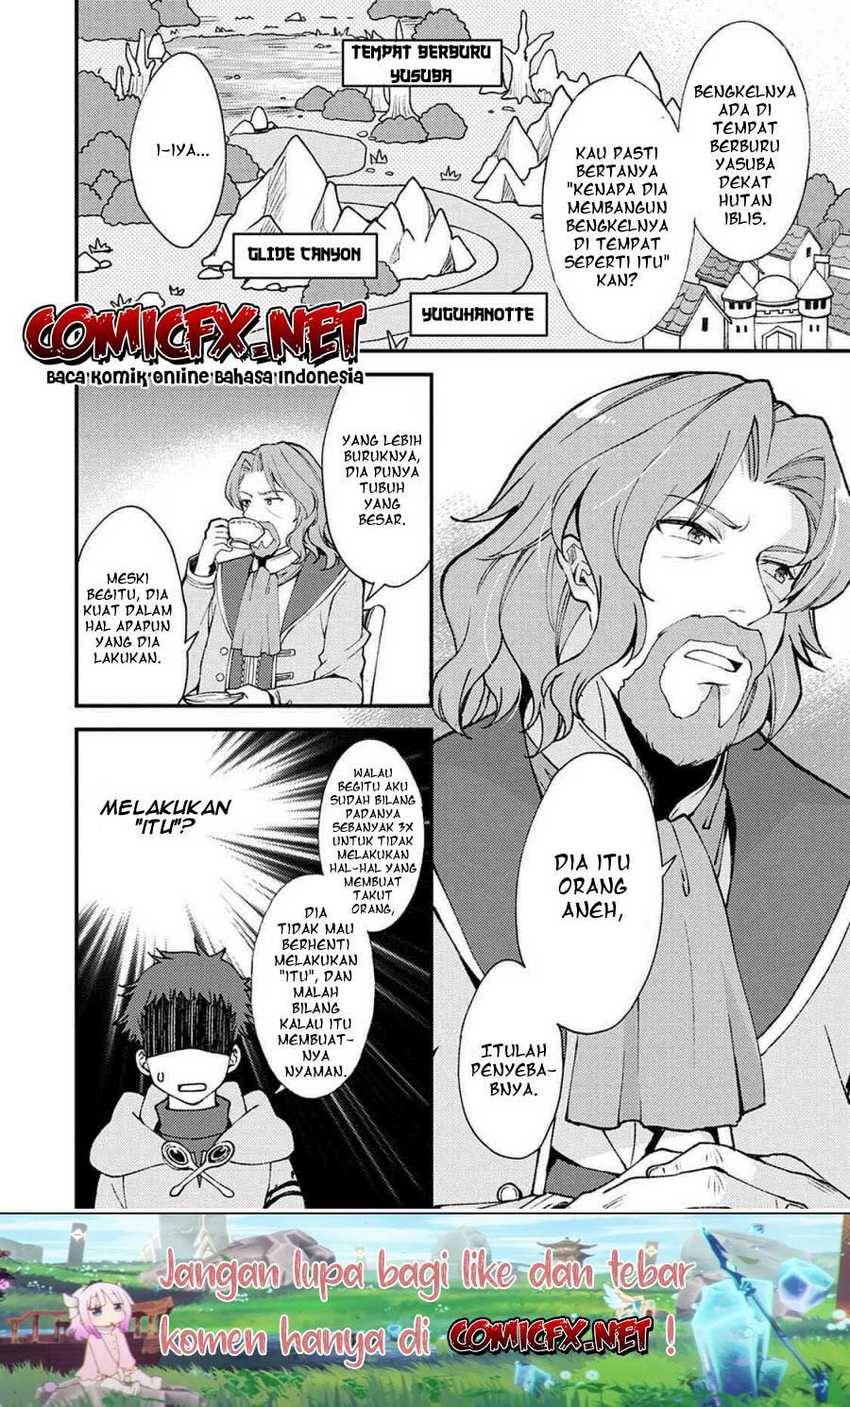 A Sword Master Childhood Friend Power Harassed Me Harshly, So I Broke off Our Relationship and Make a Fresh Start at the Frontier as a Magic Swordsman Chapter 08.2